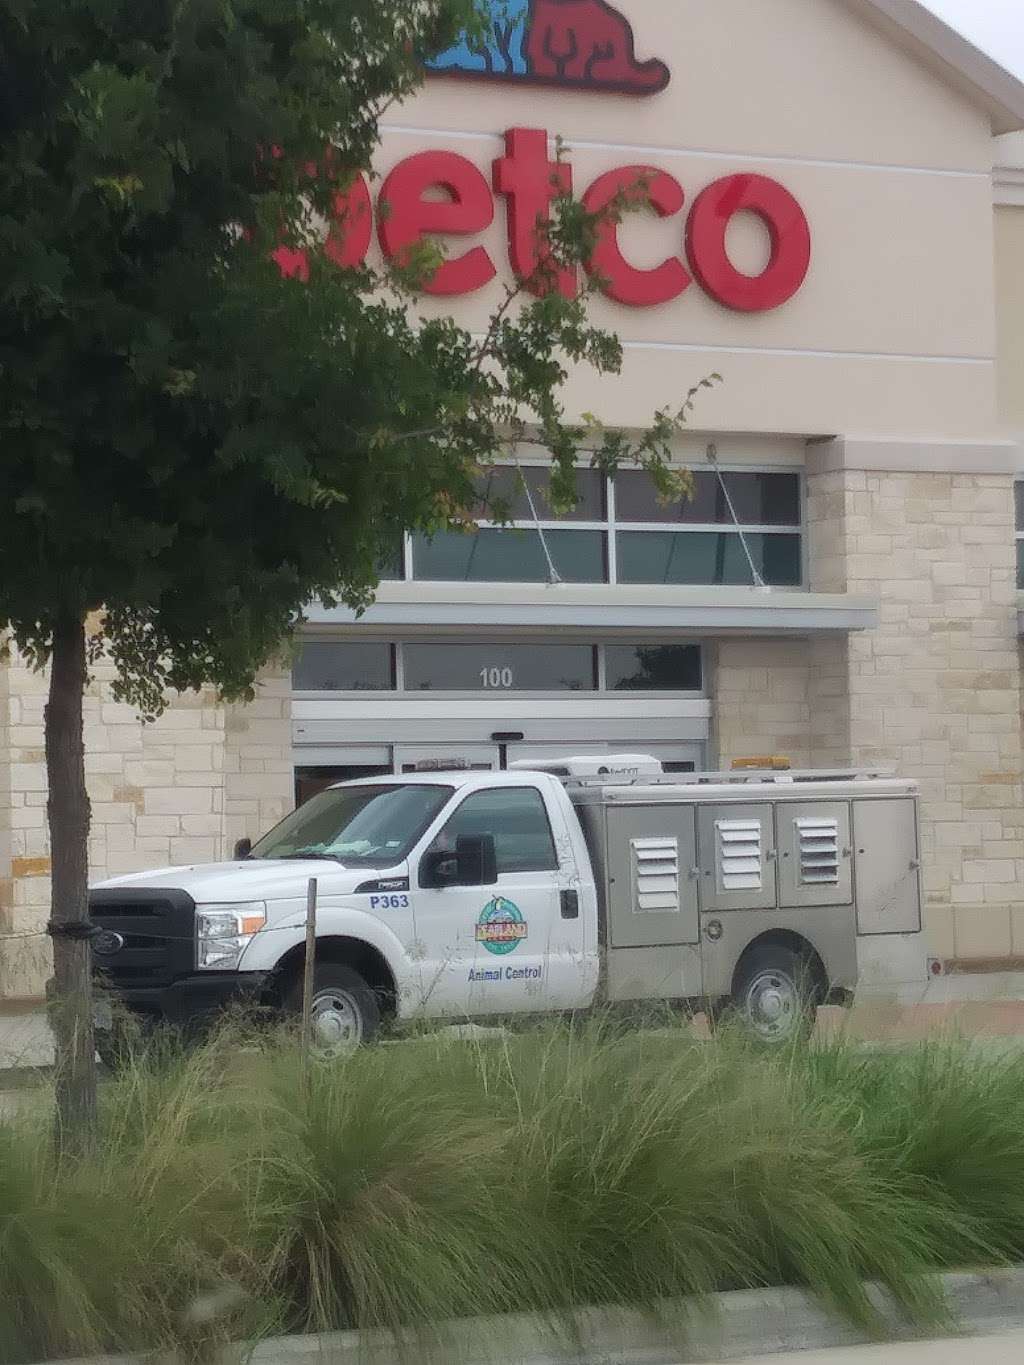 Petco Animal Supplies | 2650 Pearland Pkwy, Pearland, TX 77581 | Phone: (281) 412-4633